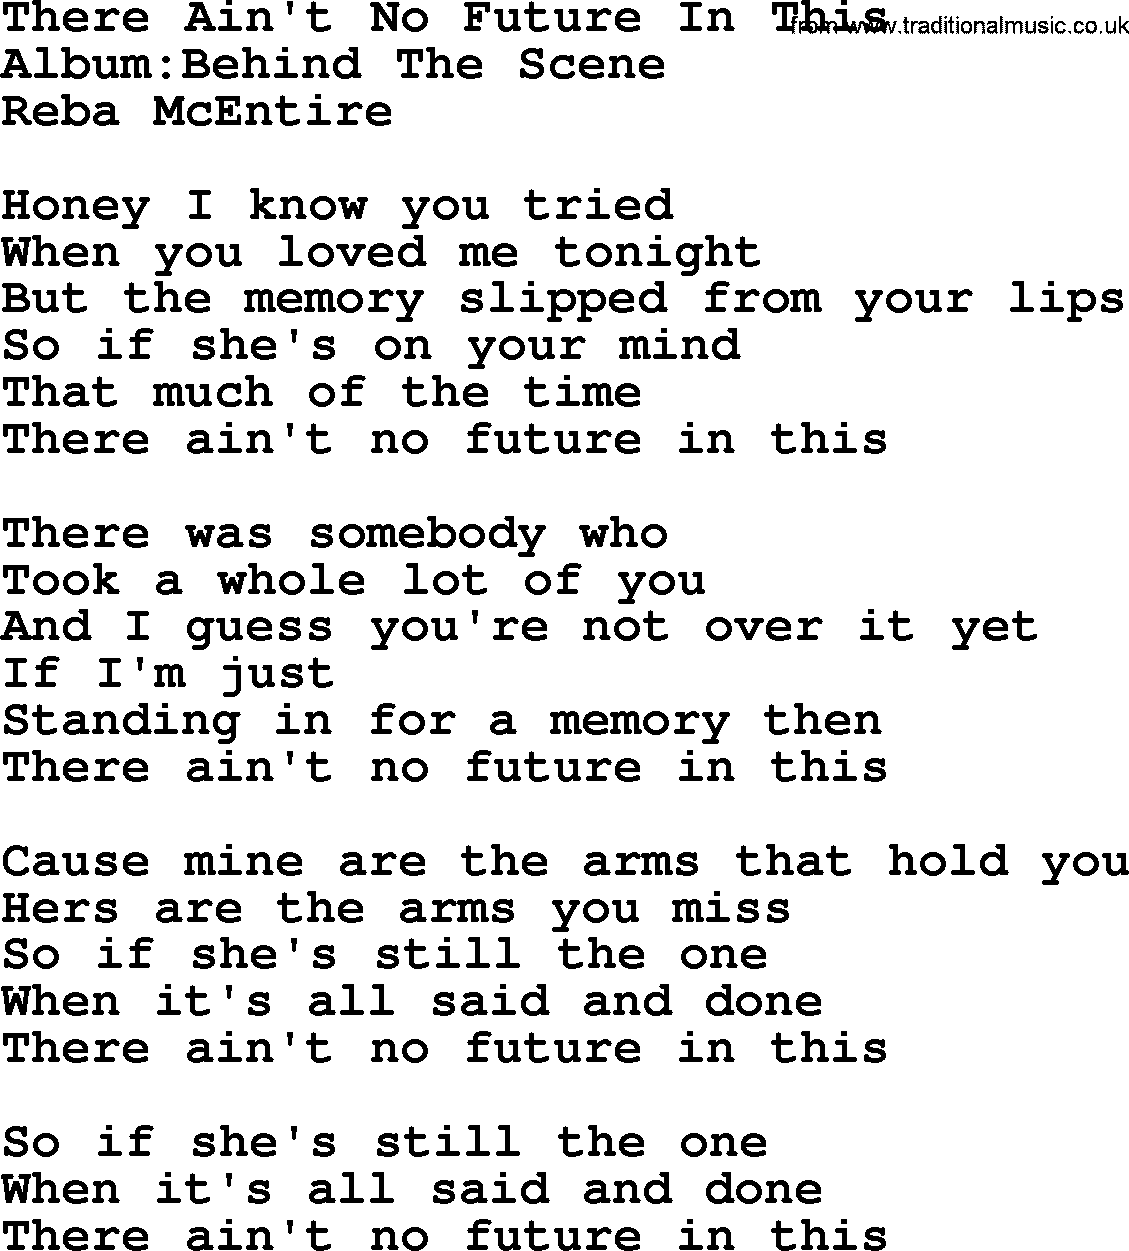 Reba McEntire song: There Ain't No Future In This lyrics